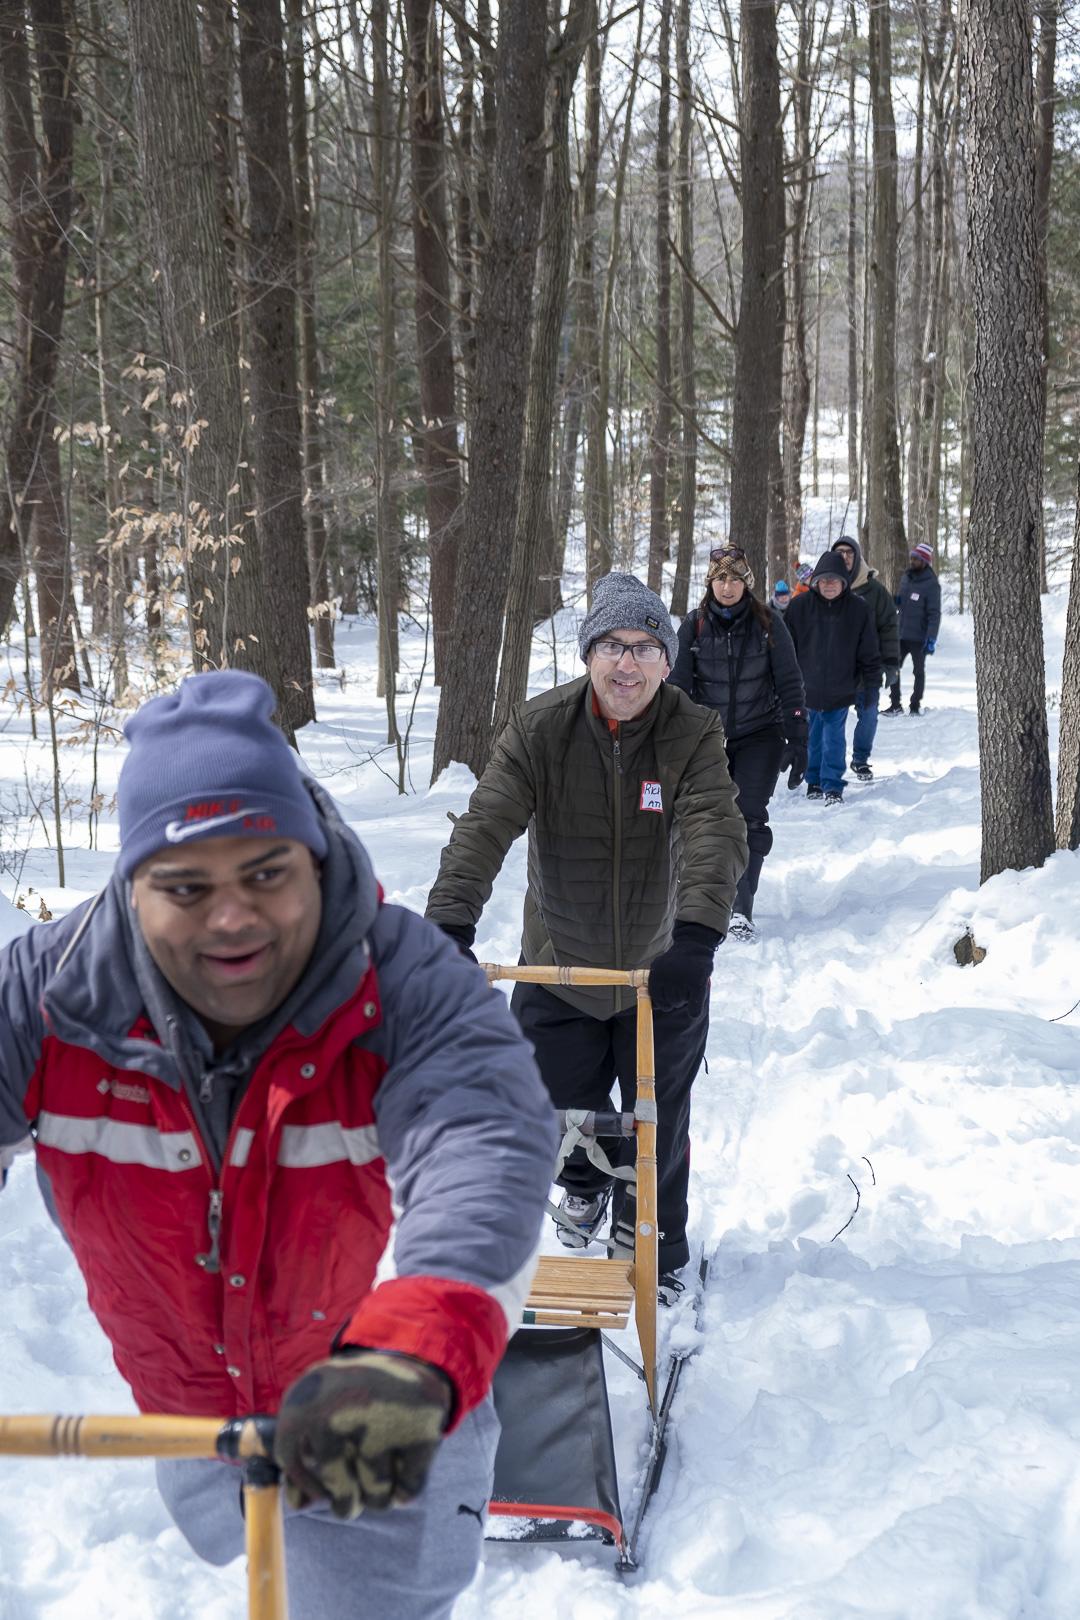 A  group of snowshoers on a trail in the woods. Twohikers are pushing kick sleds.